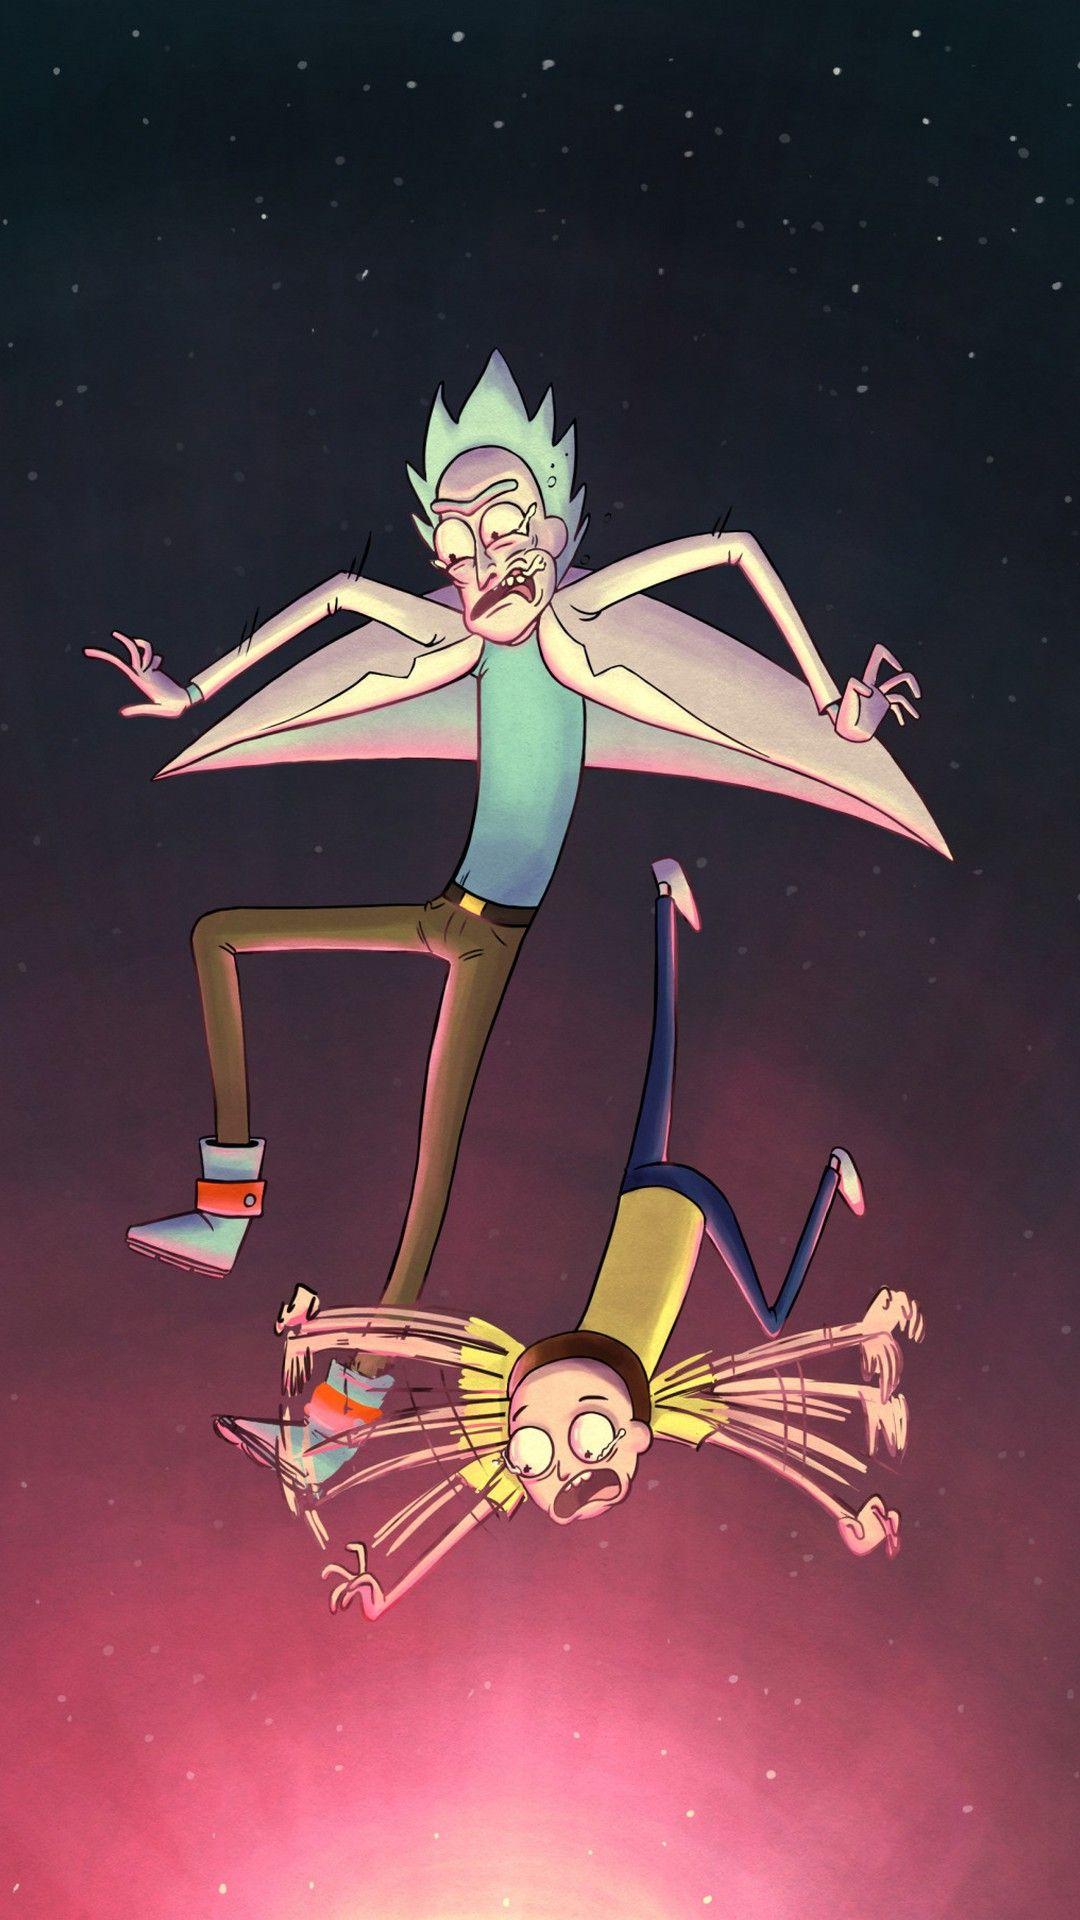 Wallpaper Rick and Morty iPhone is high definition phone wallpaper